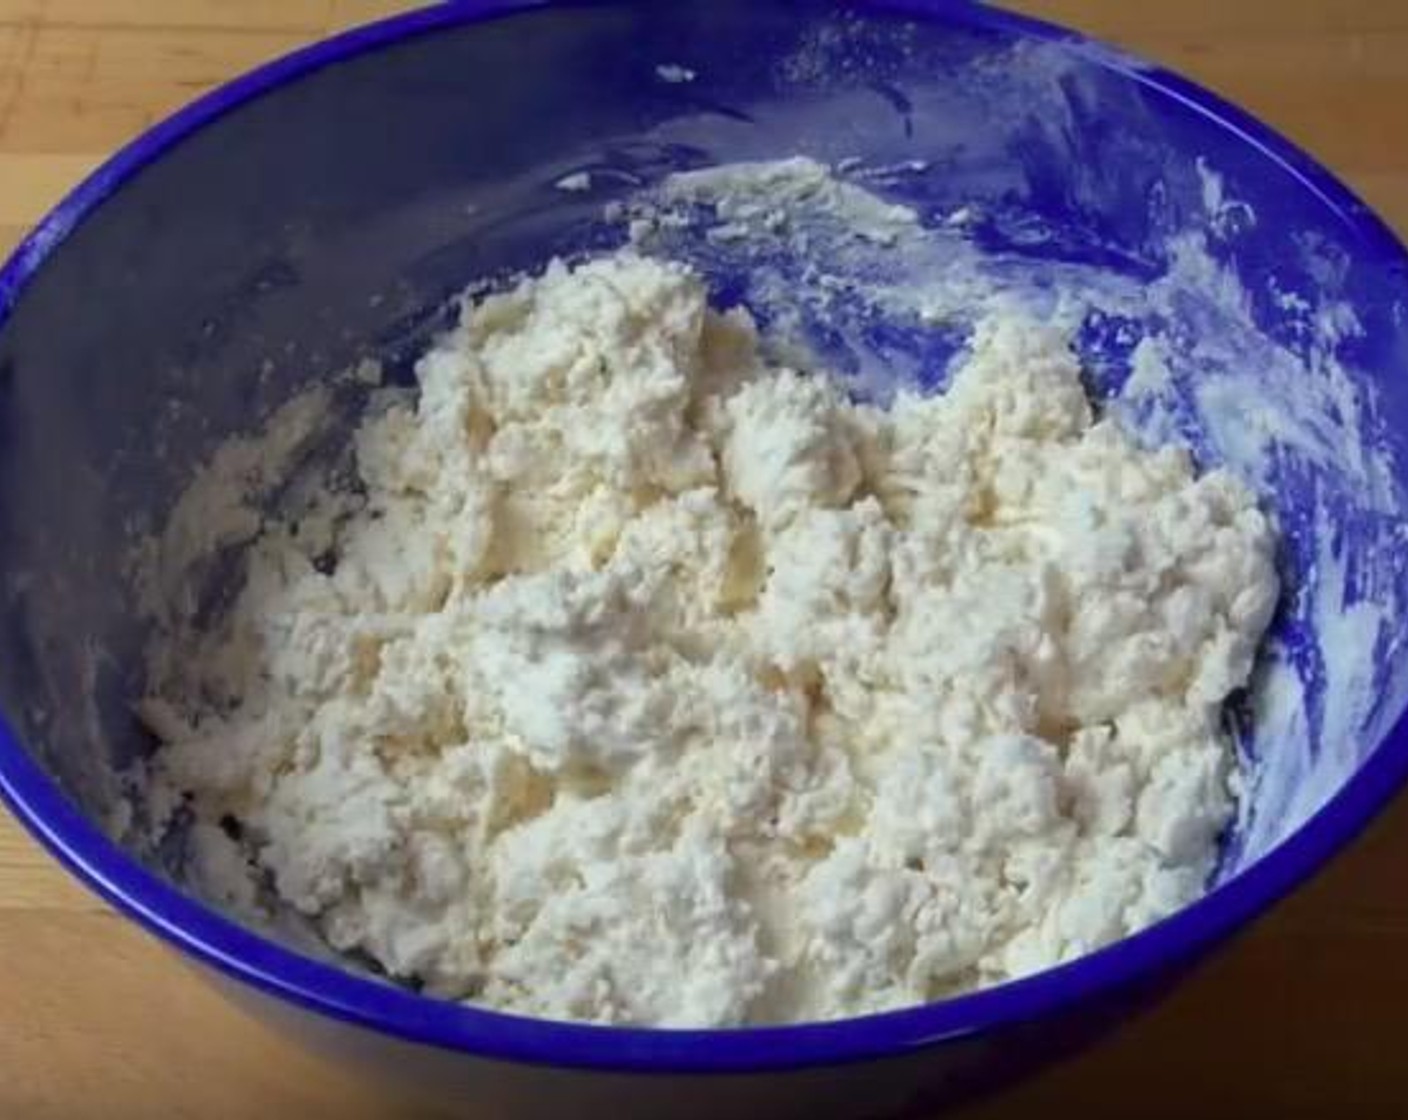 step 1 In a large mixing bowl, add Self-Rising Flour (2 cups), Salt (1 tsp) and Natural Unflavored Yogurt (2 cups). Using a round-bladed knife, make cutting motions through the mixture until it comes together.